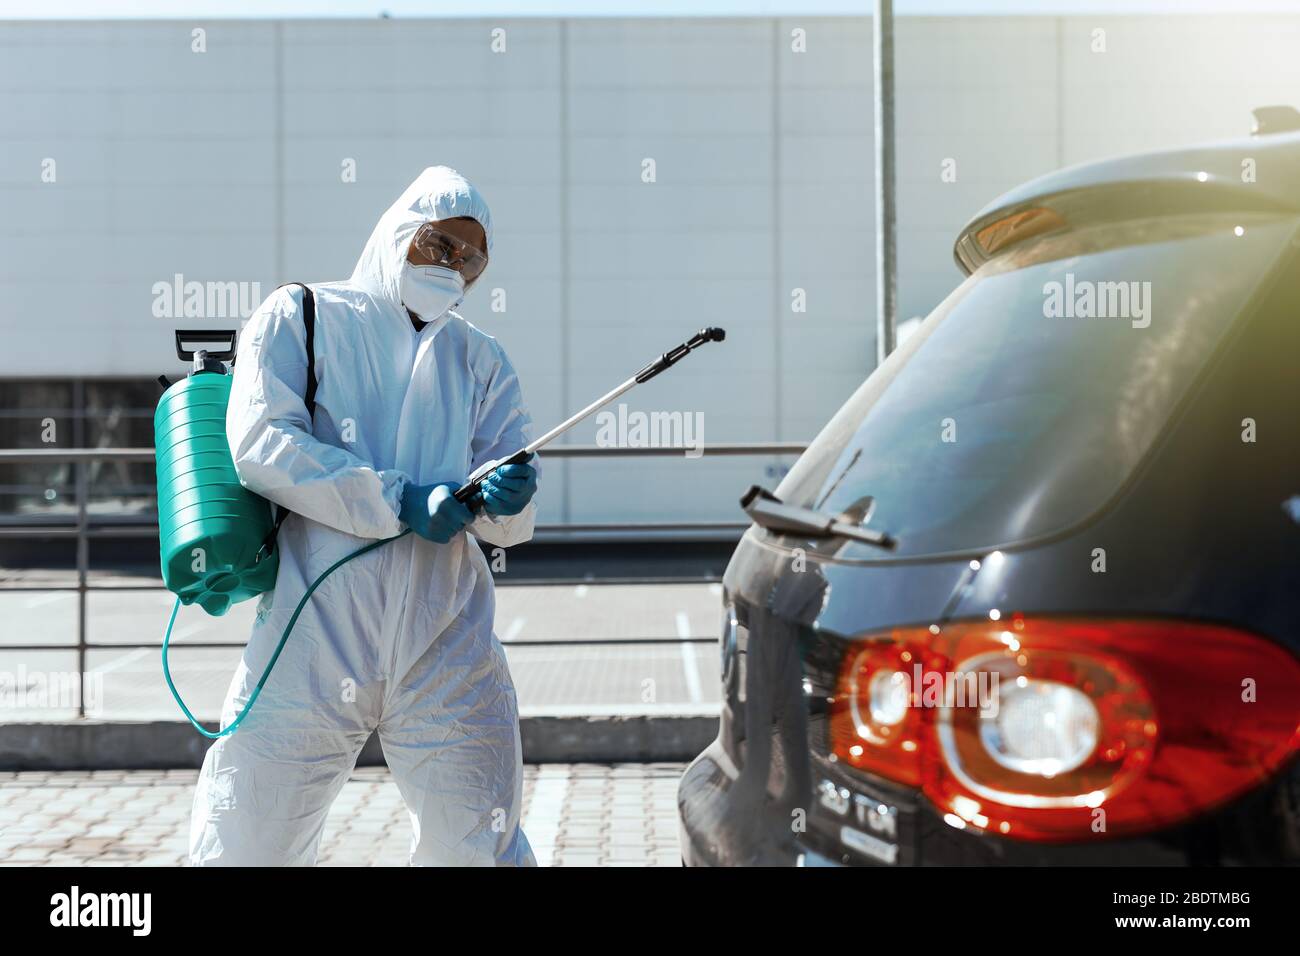 Disinfector in protective suit conducts disinfection in contaminated area of car to prevent coronavirus. Health care. Stock Photo